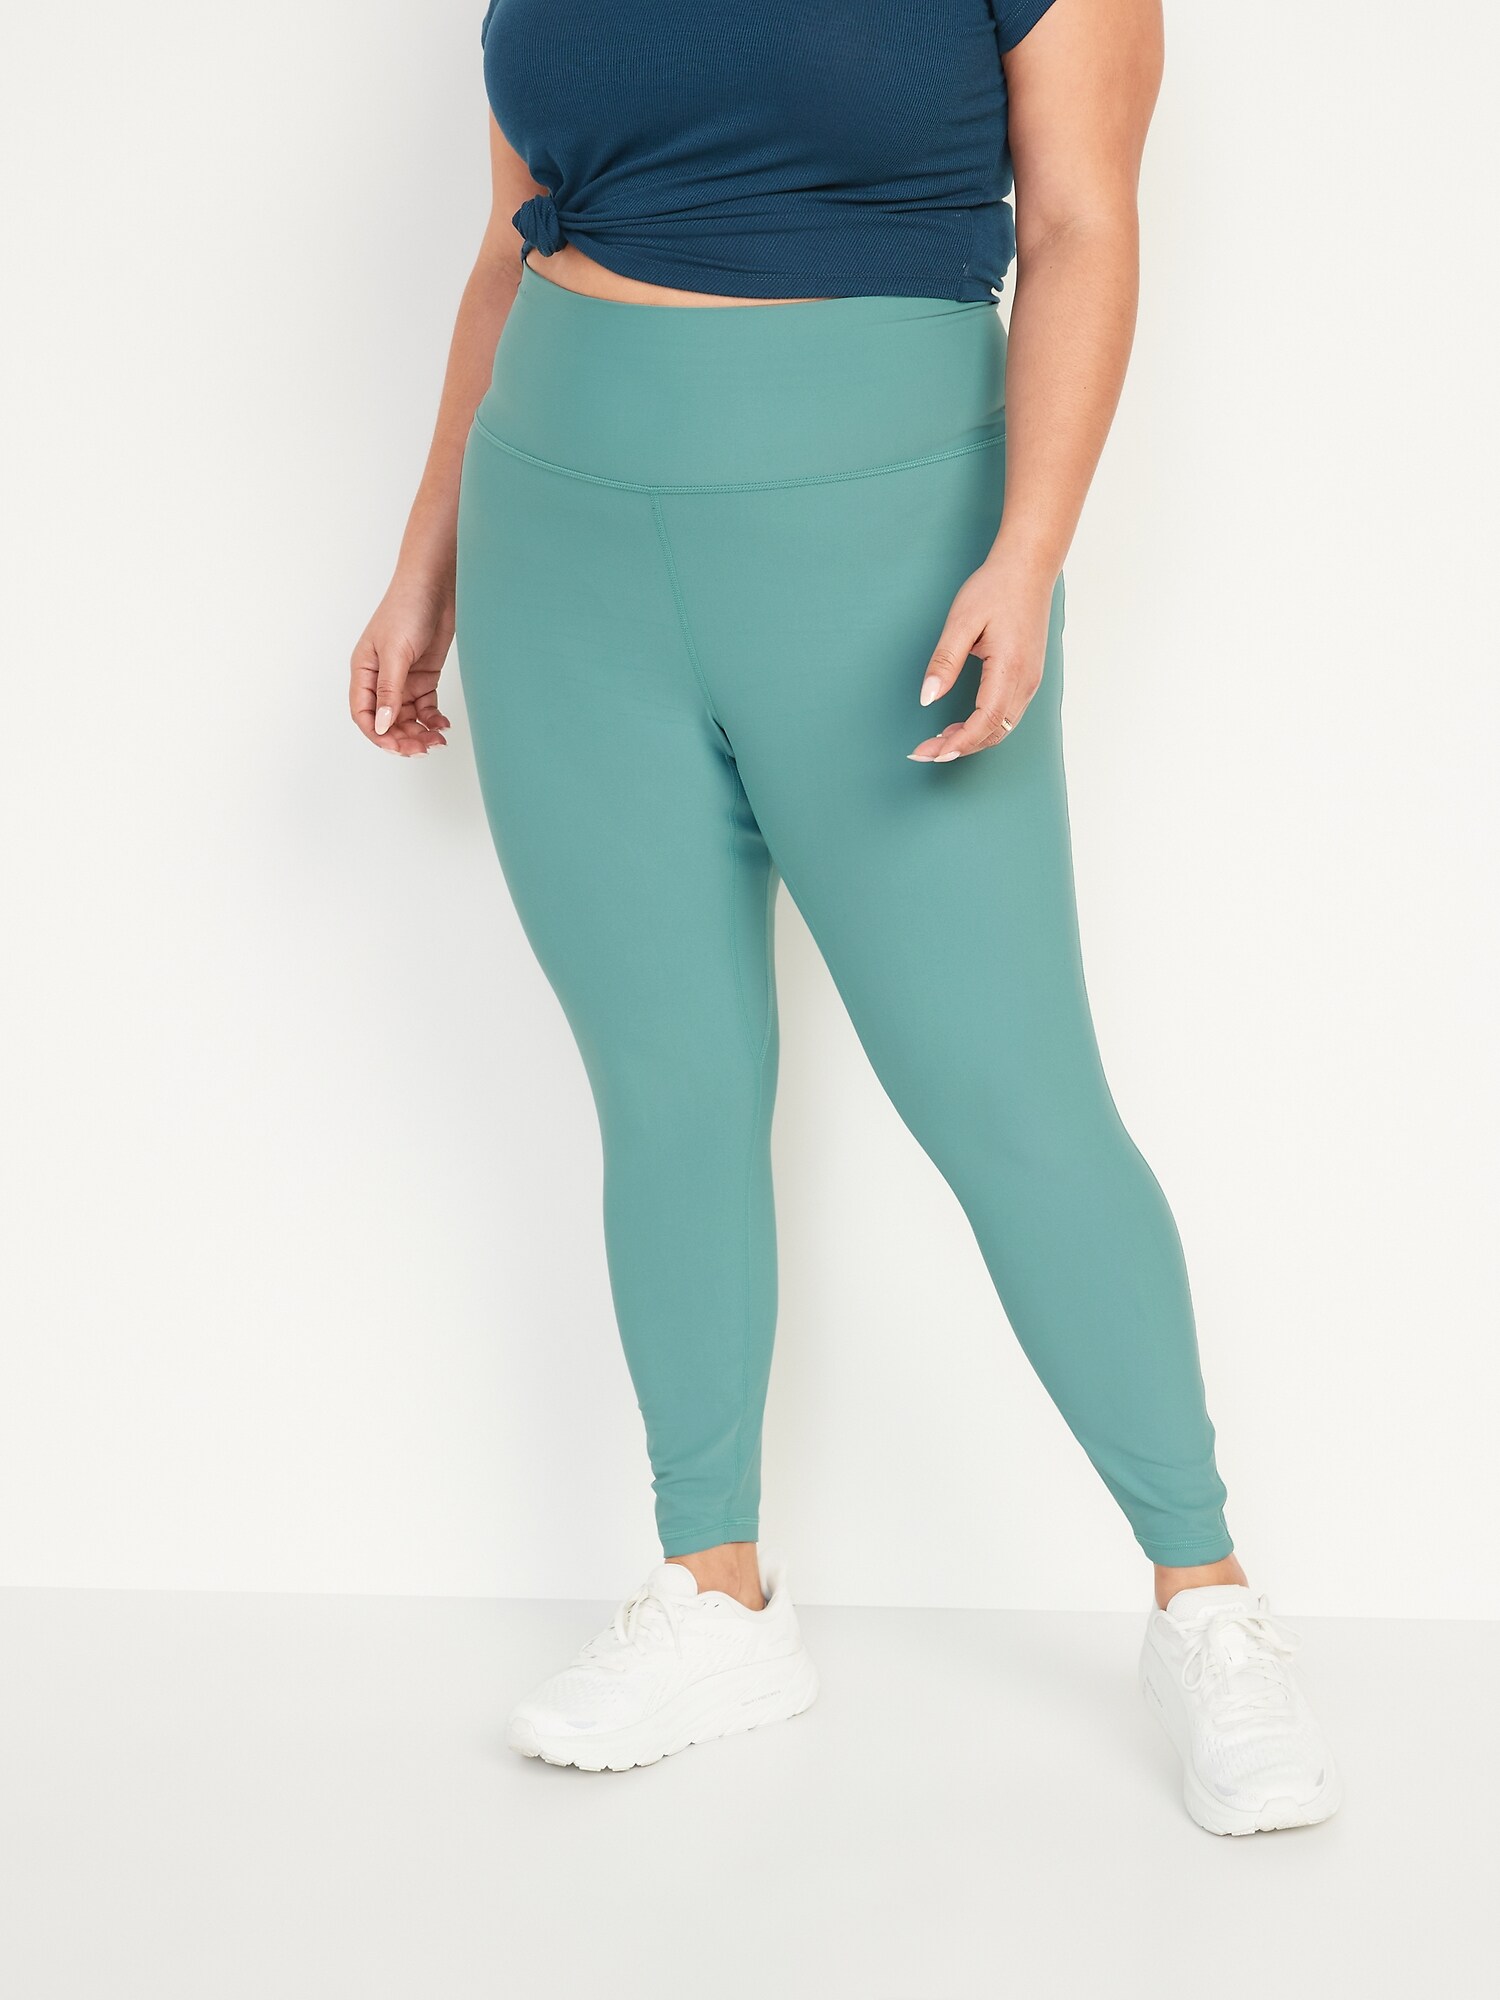 Old Navy Active Extra High-Waisted PowerLite Lycra ADAPTIV 7/8